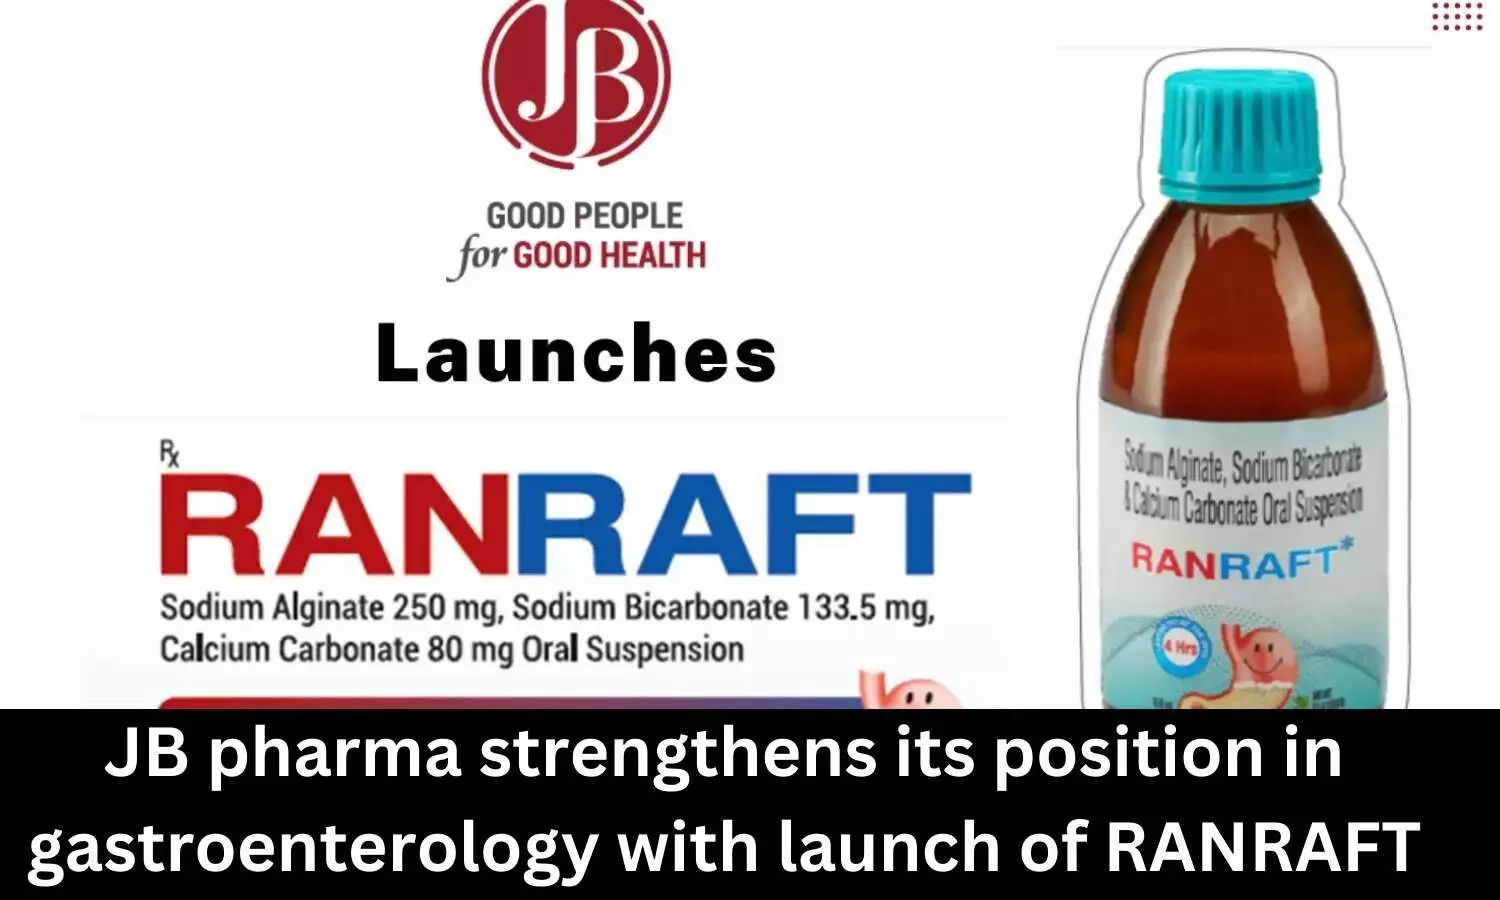 JB pharma strengthens its position in gastroenterology with launch of RANRAFT